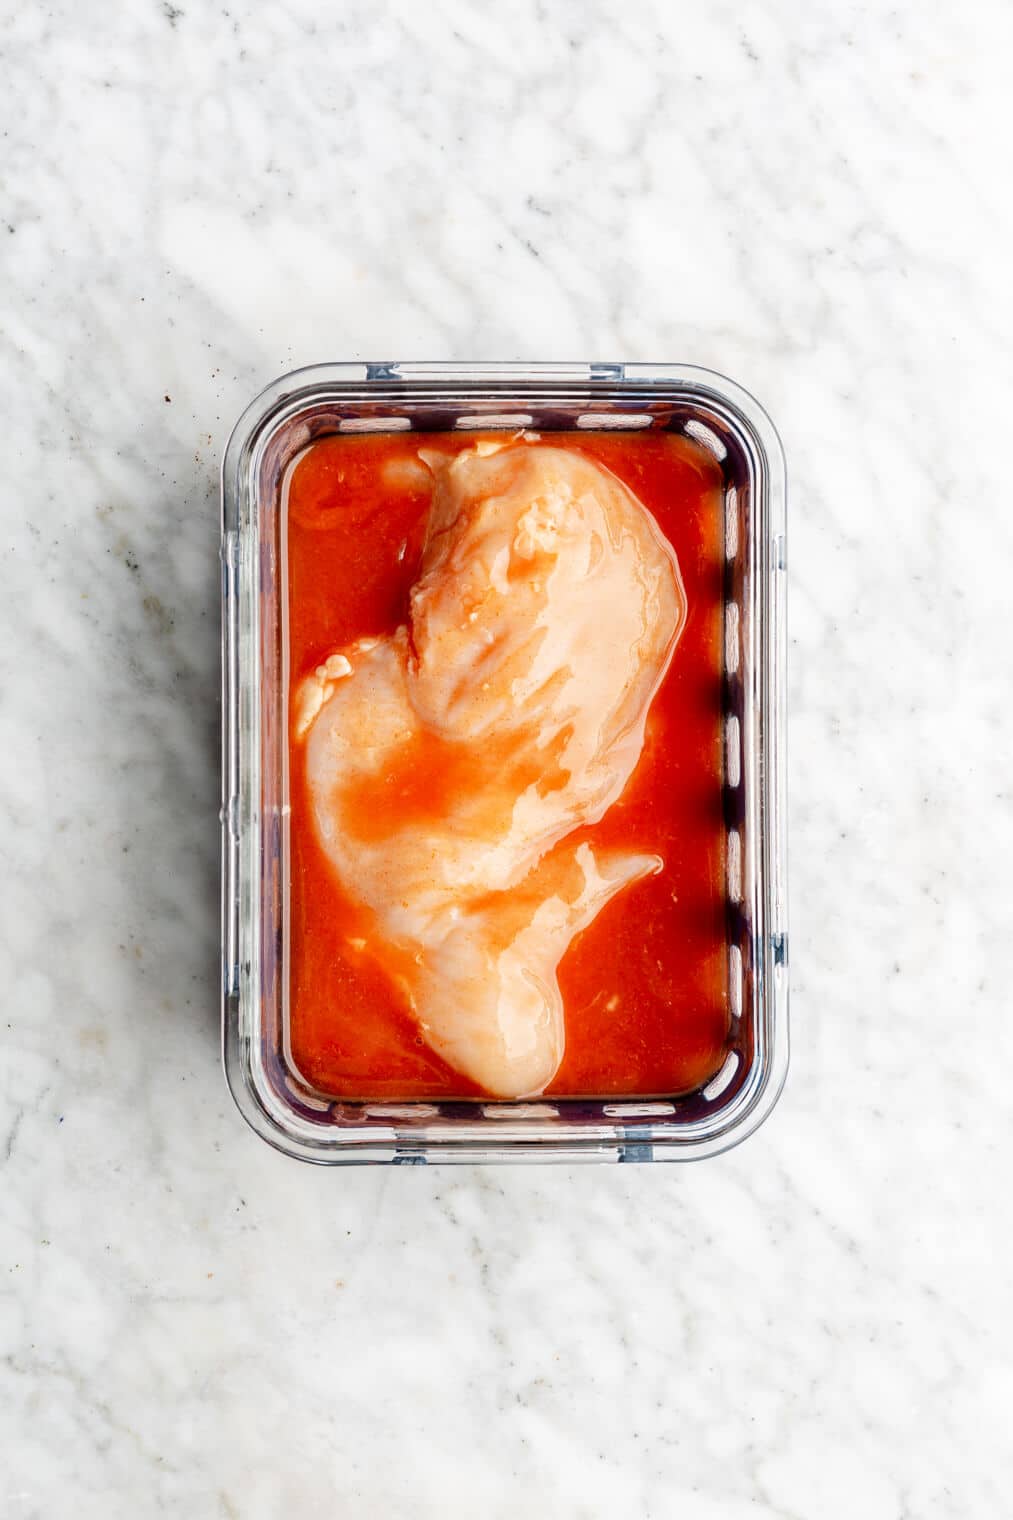 Chicken breast marinated in buffalo sauce in a glass container.